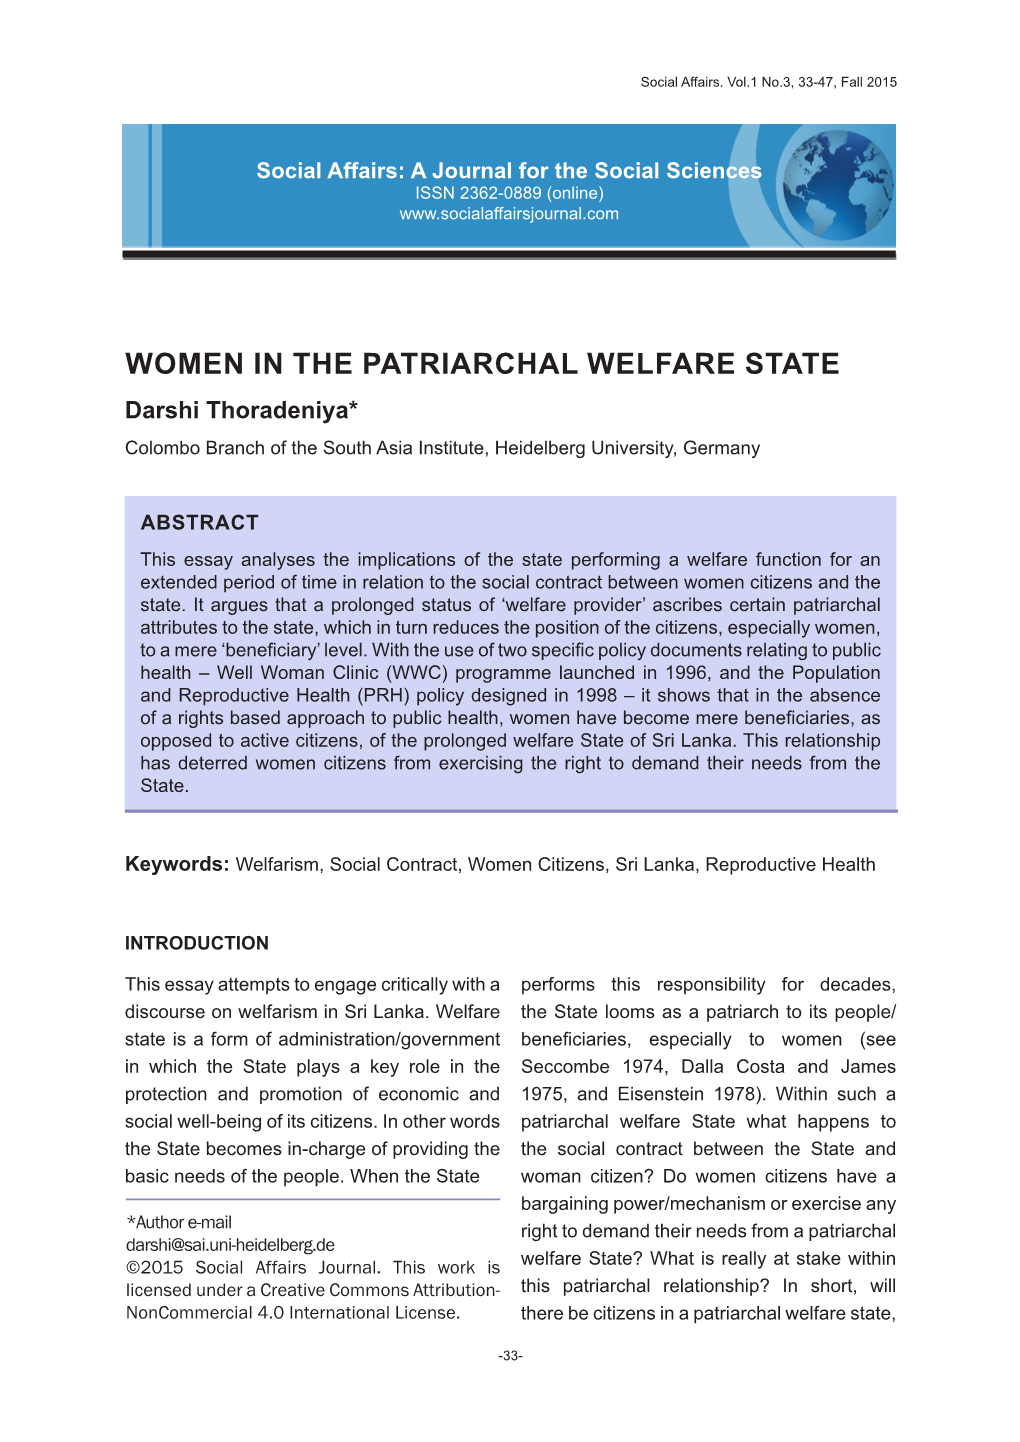 WOMEN in the PATRIARCHAL WELFARE STATE Darshi Thoradeniya* Colombo Branch of the South Asia Institute, Heidelberg University, Germany